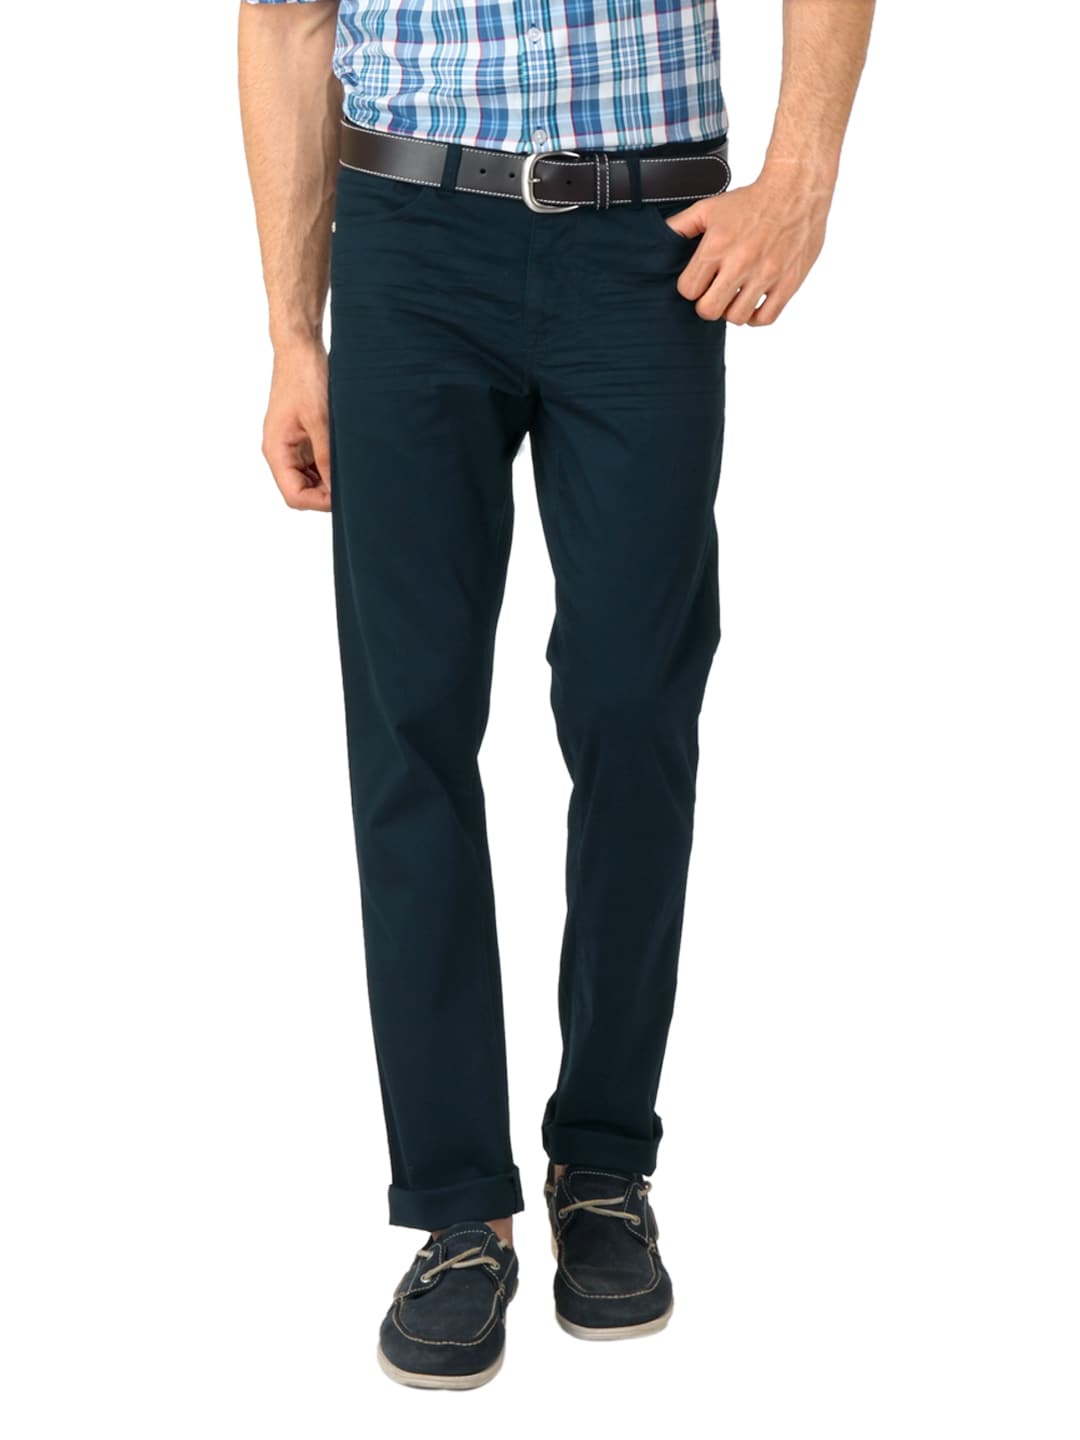 United Colors of Benetton Men's Navy Blue Trousers